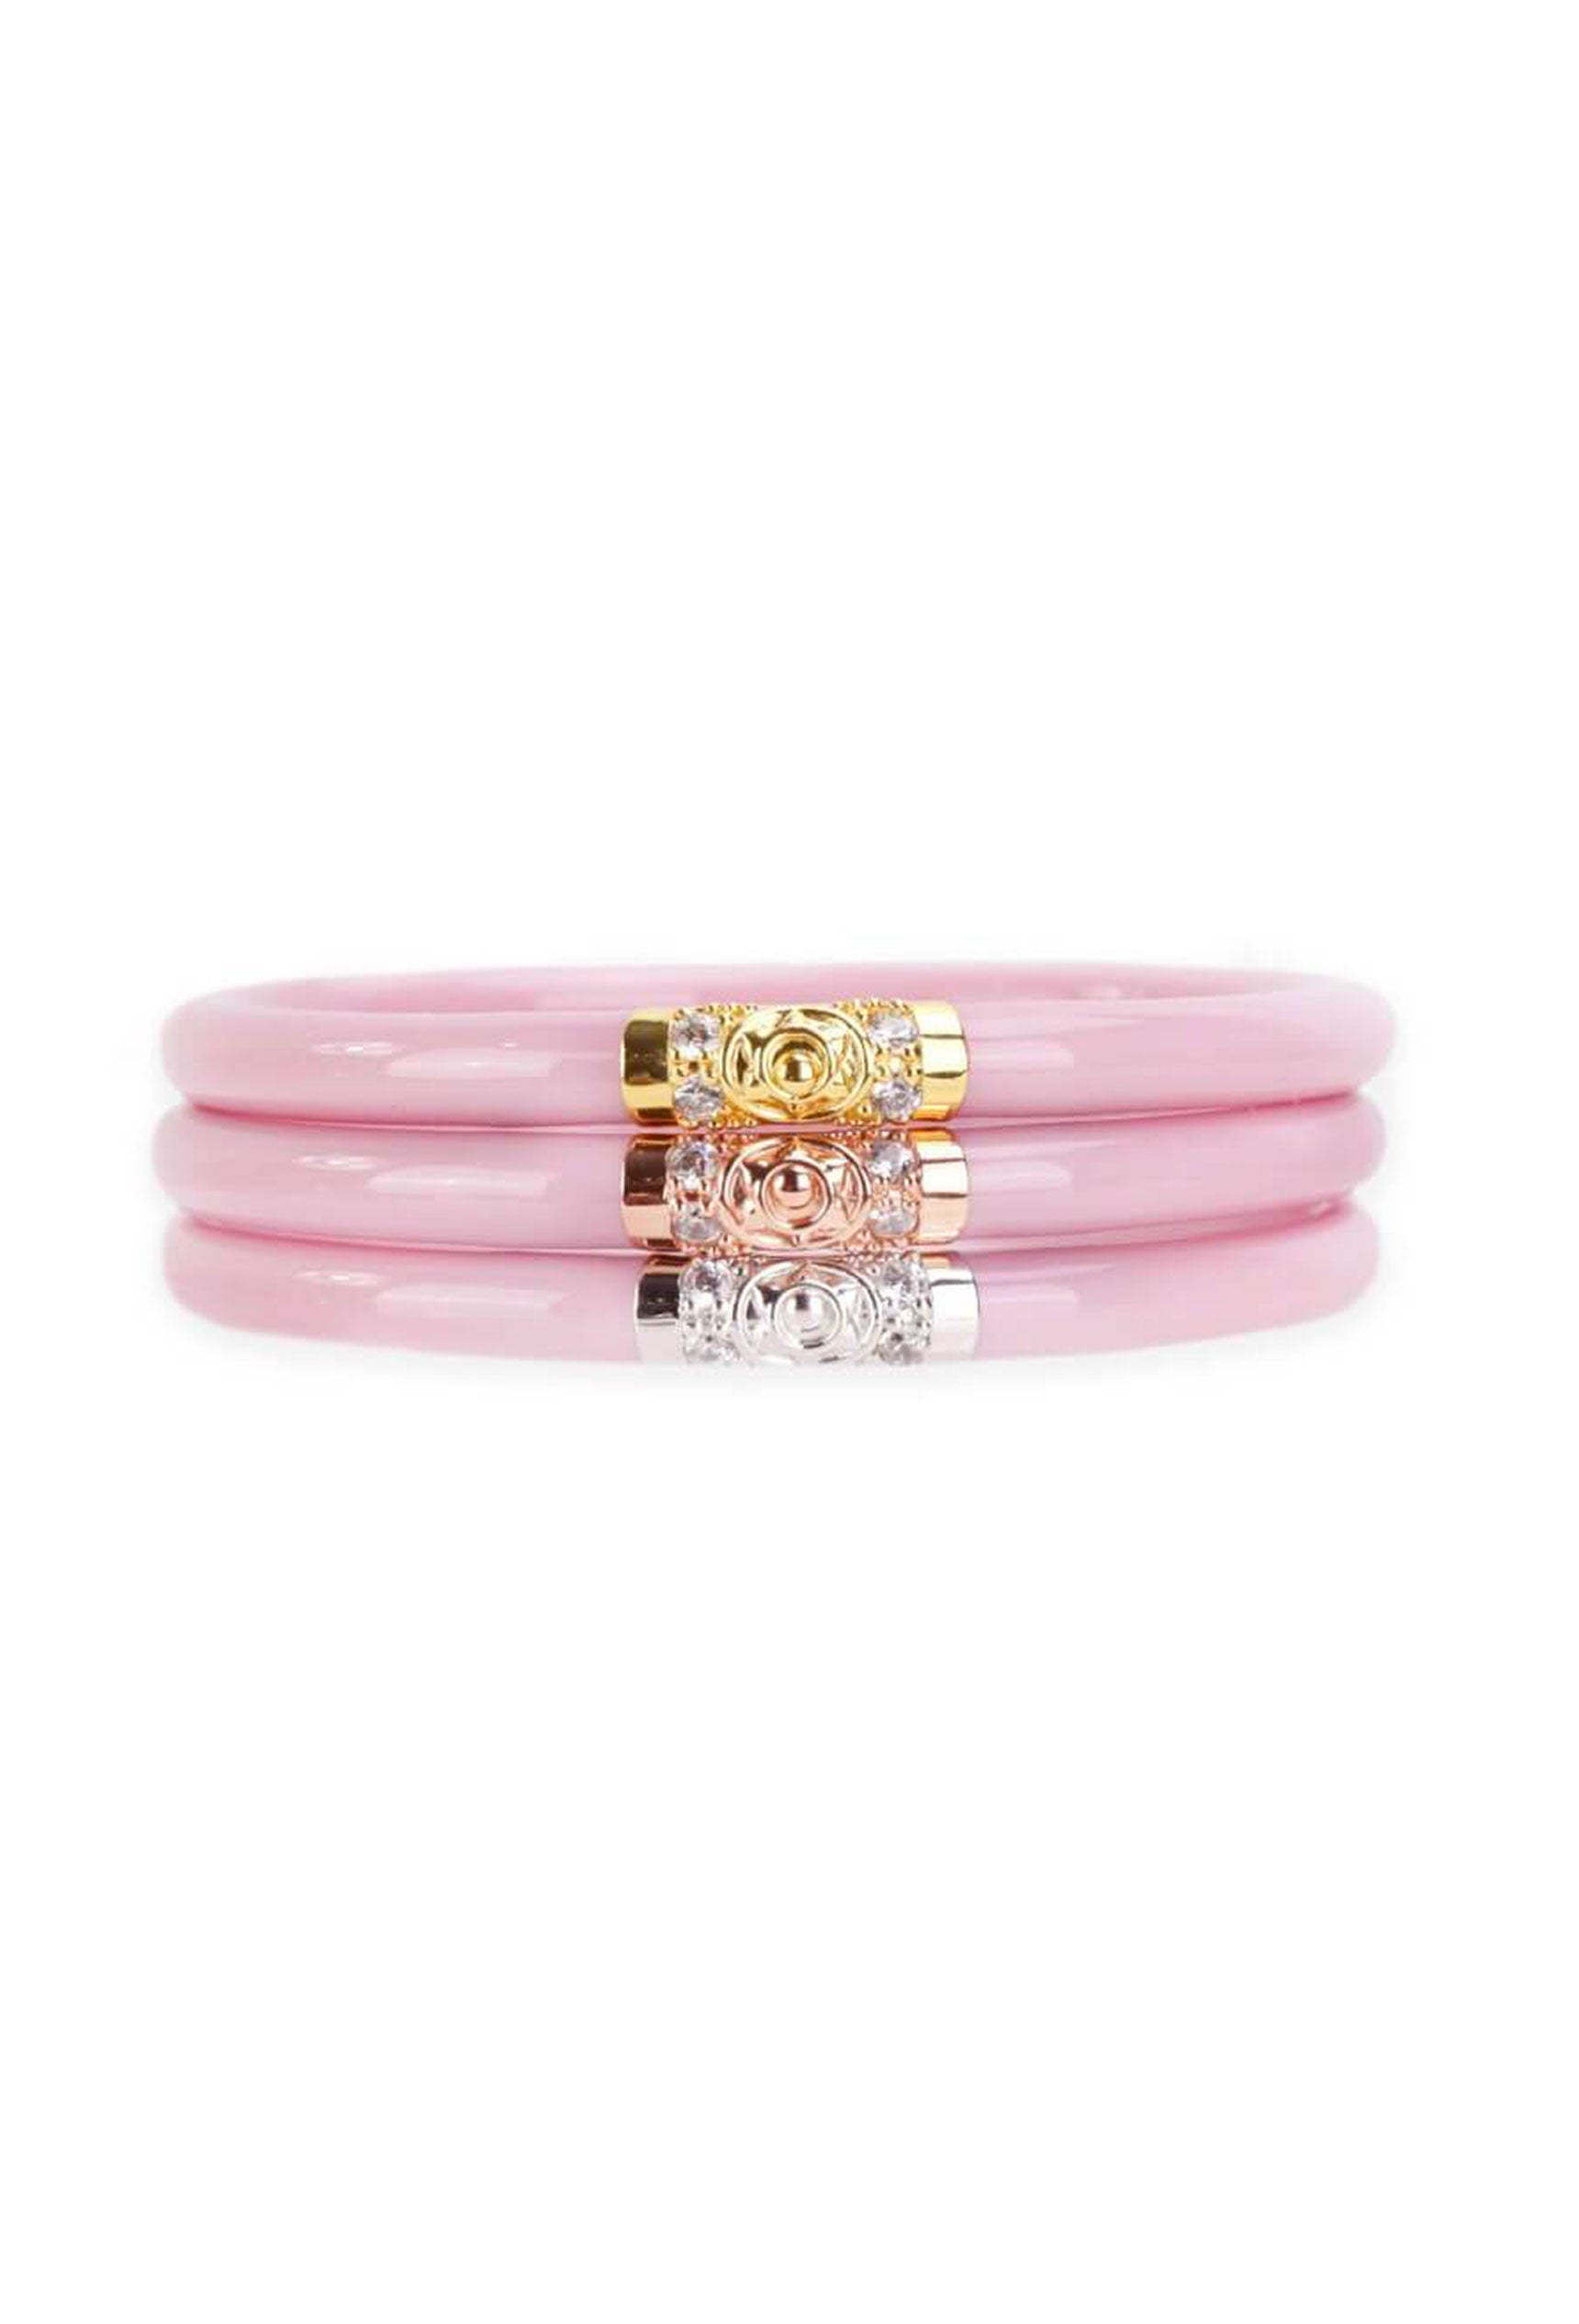 Budhagirl All Weather Bangles in Pink, Three Kings All Weather Bangles in Pink, Budhagirl Three Kings Bangles